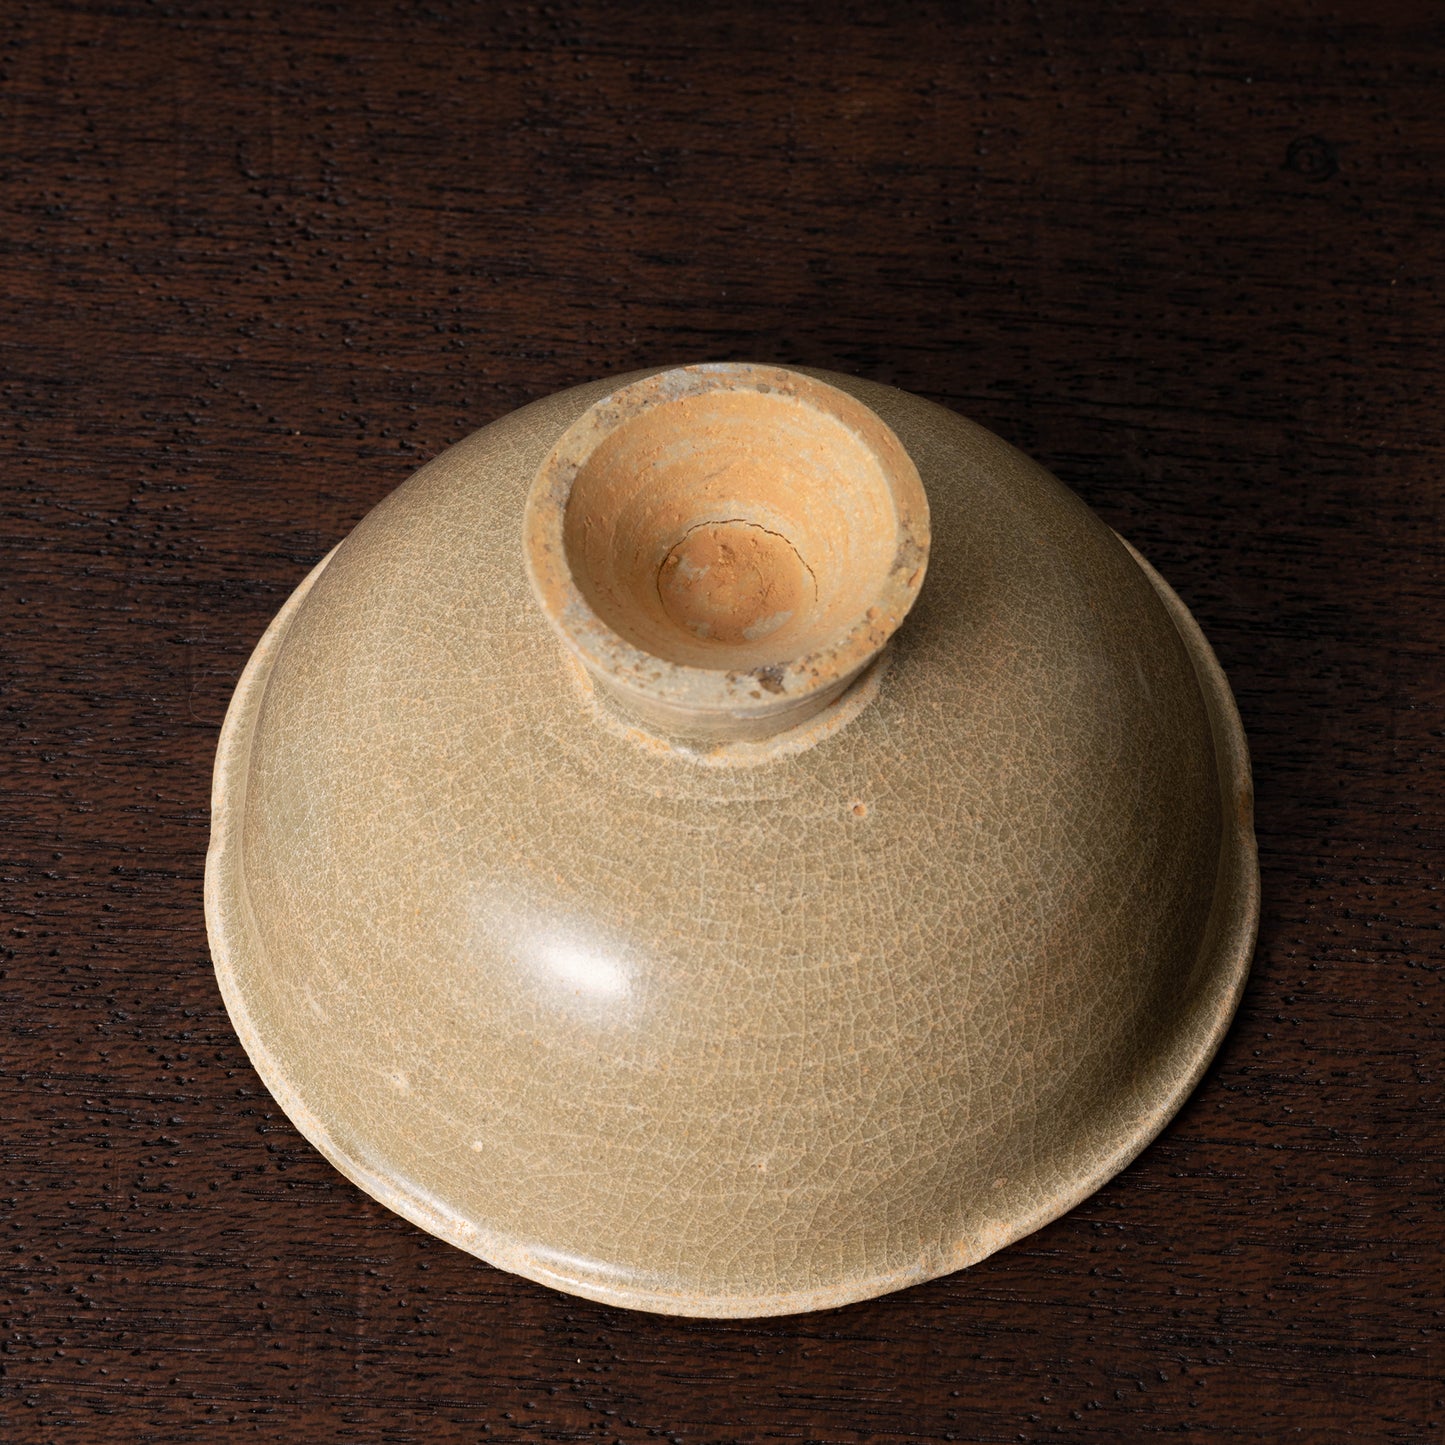 Southern Song Dynasty Yue ware Celadon Lobed Cup and Stand with Saucers